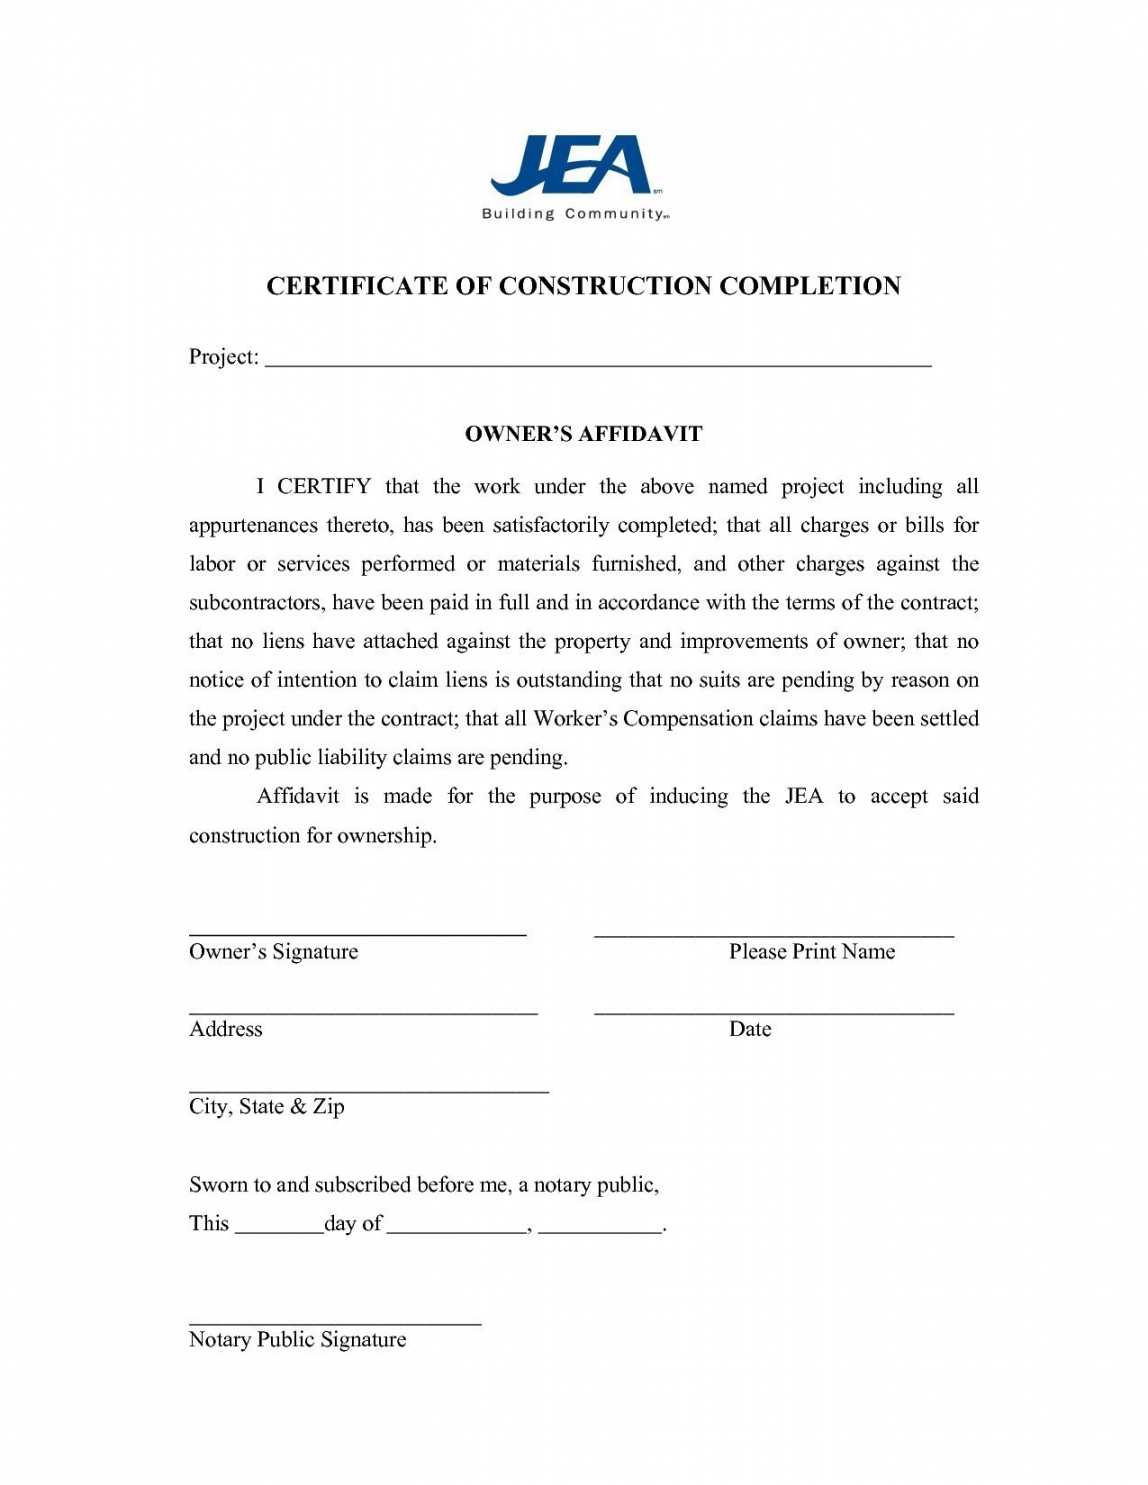 Construction Completion Certificate Template | Emetonlineblog Pertaining To Certificate Template For Project Completion